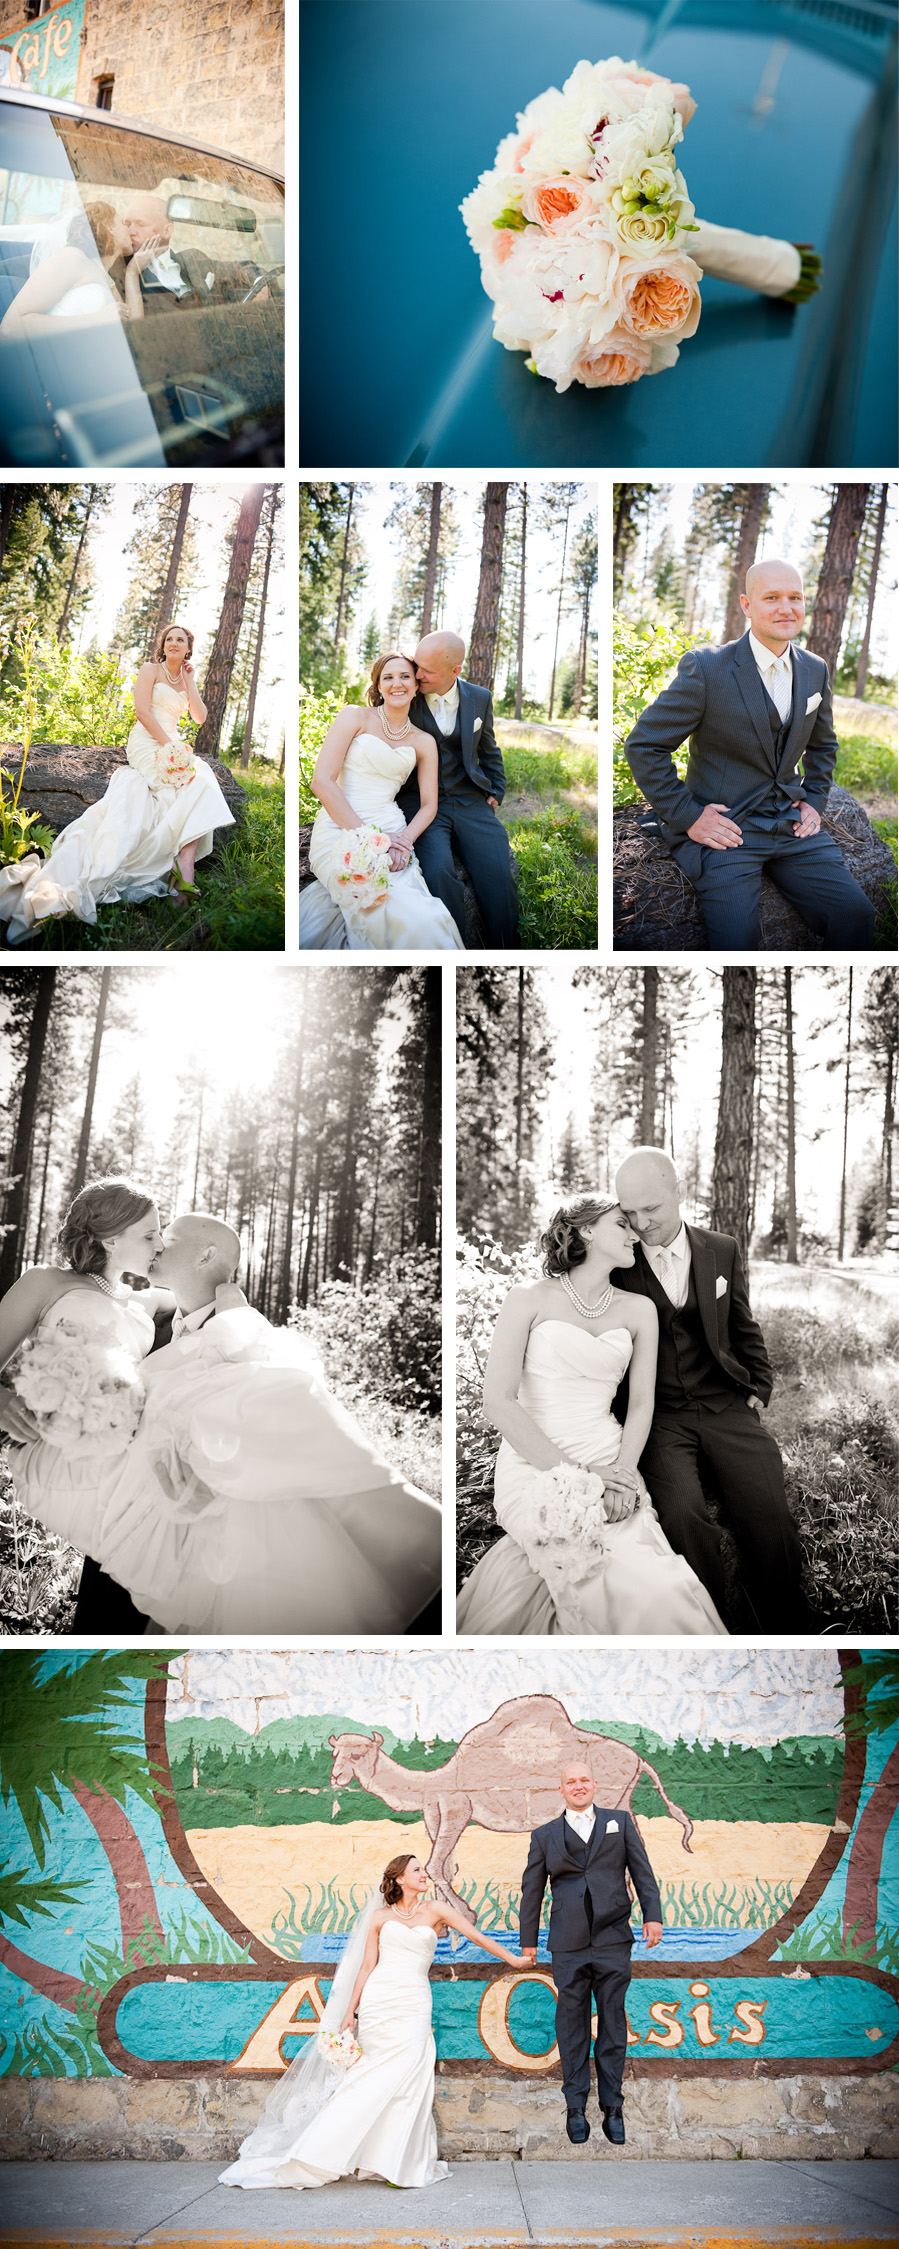 Bride and Groom wedding portraits at Suncadia Resort by Seattle Photographer